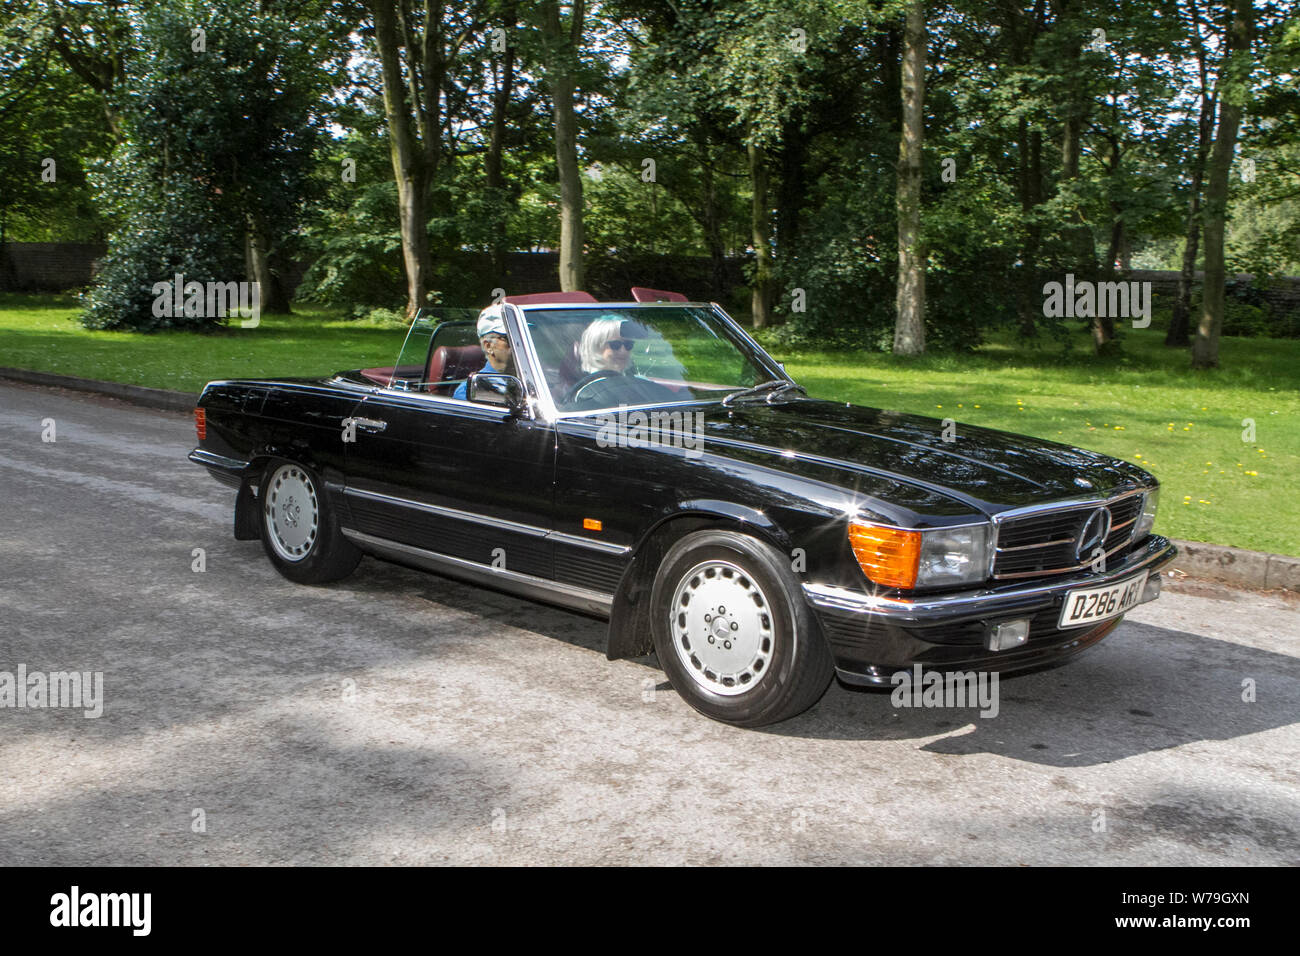 Mercedes Convertible Vintage Black High Resolution Stock Photography And Images Alamy